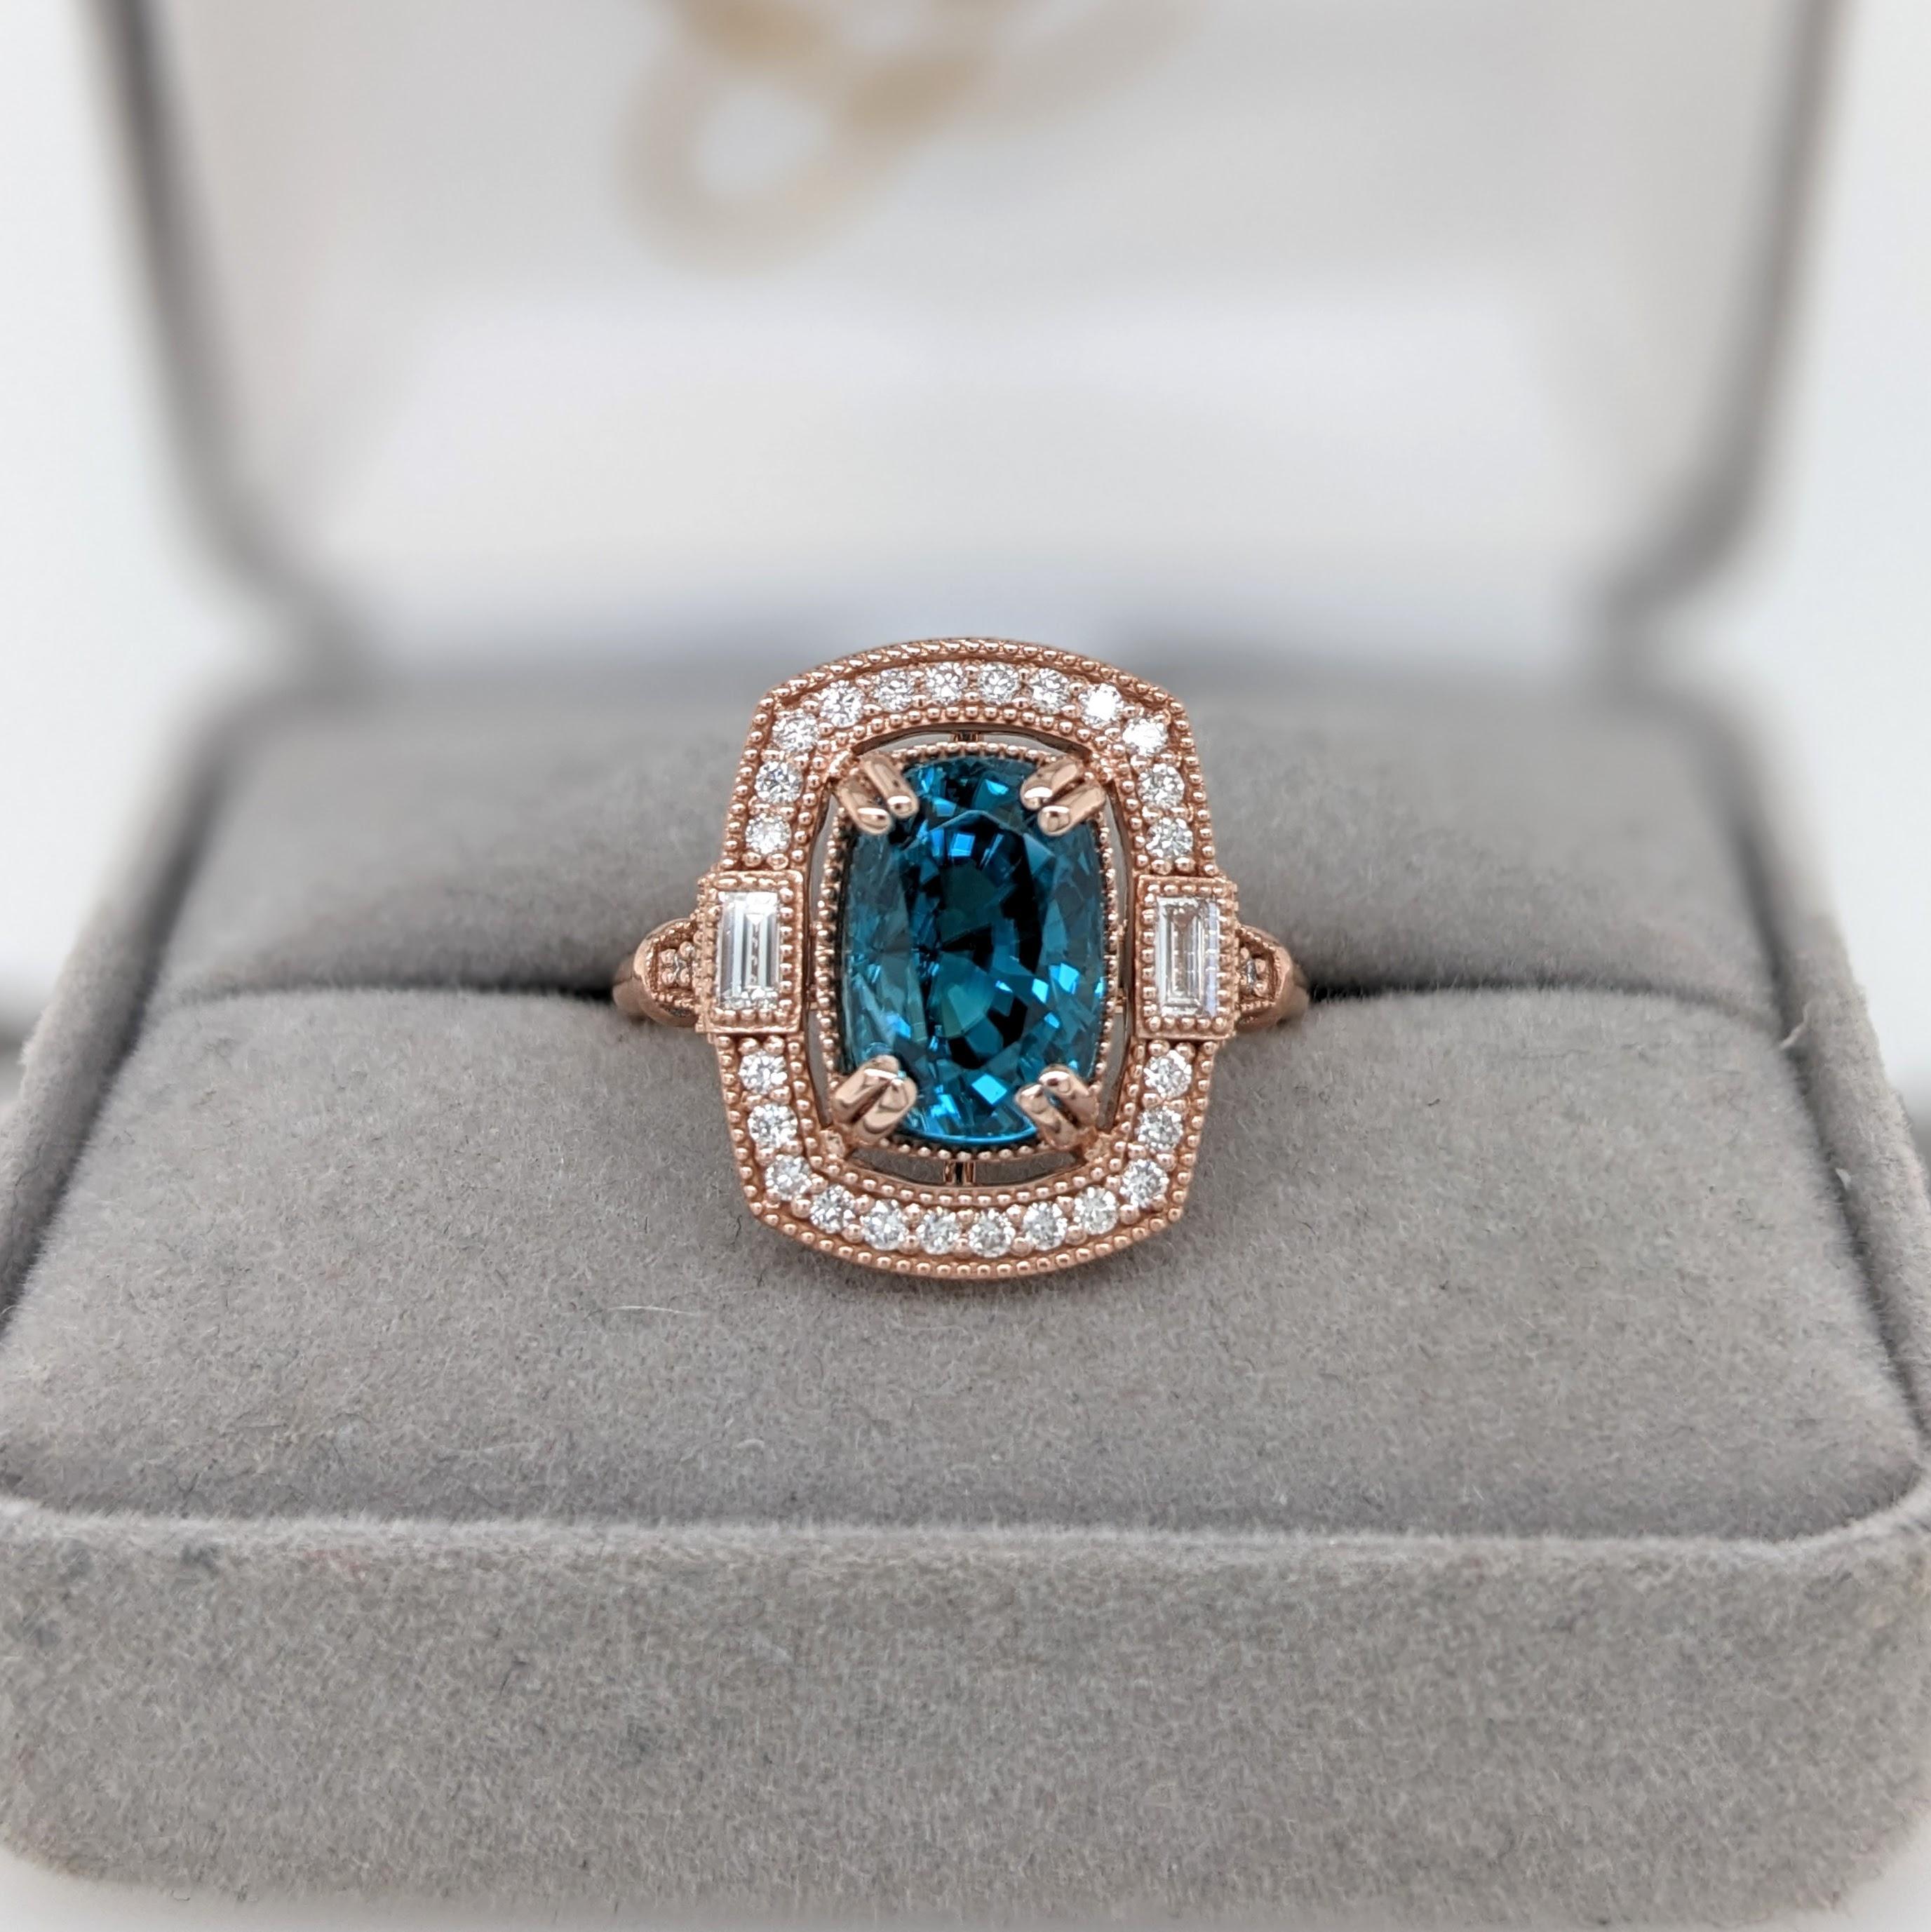 Cushion Cut 5.4ct Blue Zircon Ring w Earth Mined Diamonds in Solid 14K Rose Gold CU 10x7mm For Sale